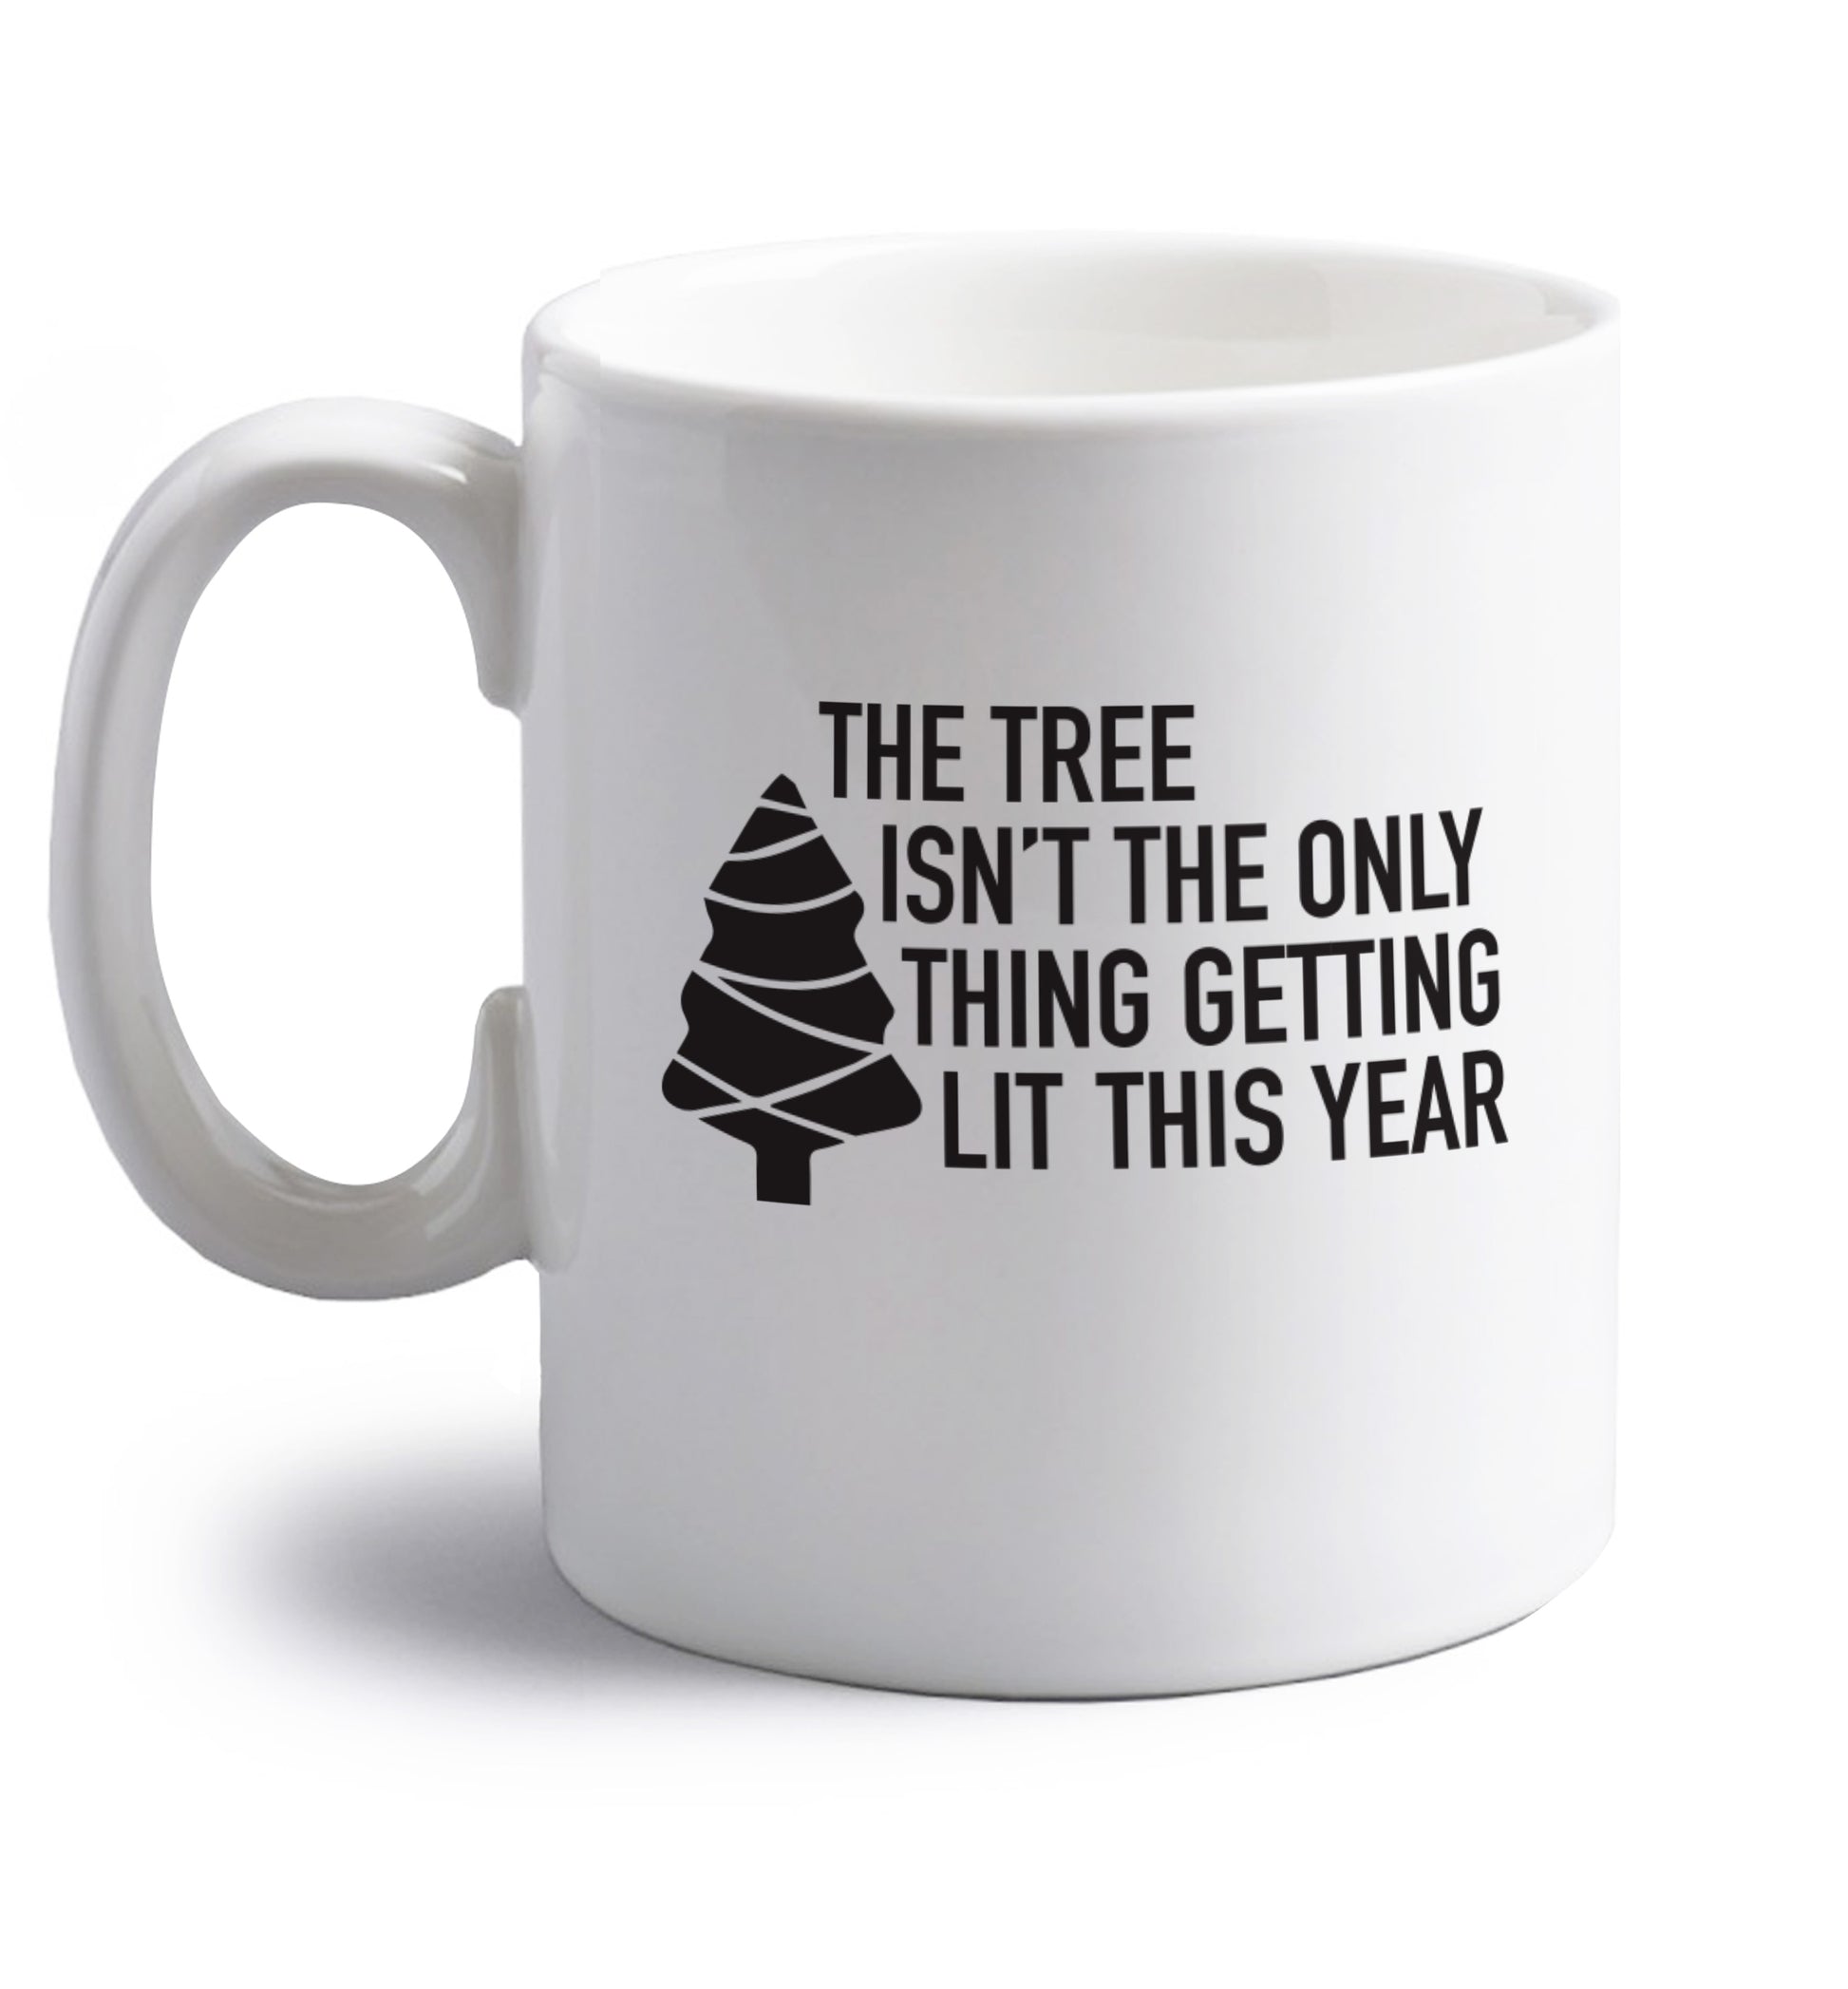 The tree isn't the only thing getting lit this year right handed white ceramic mug 